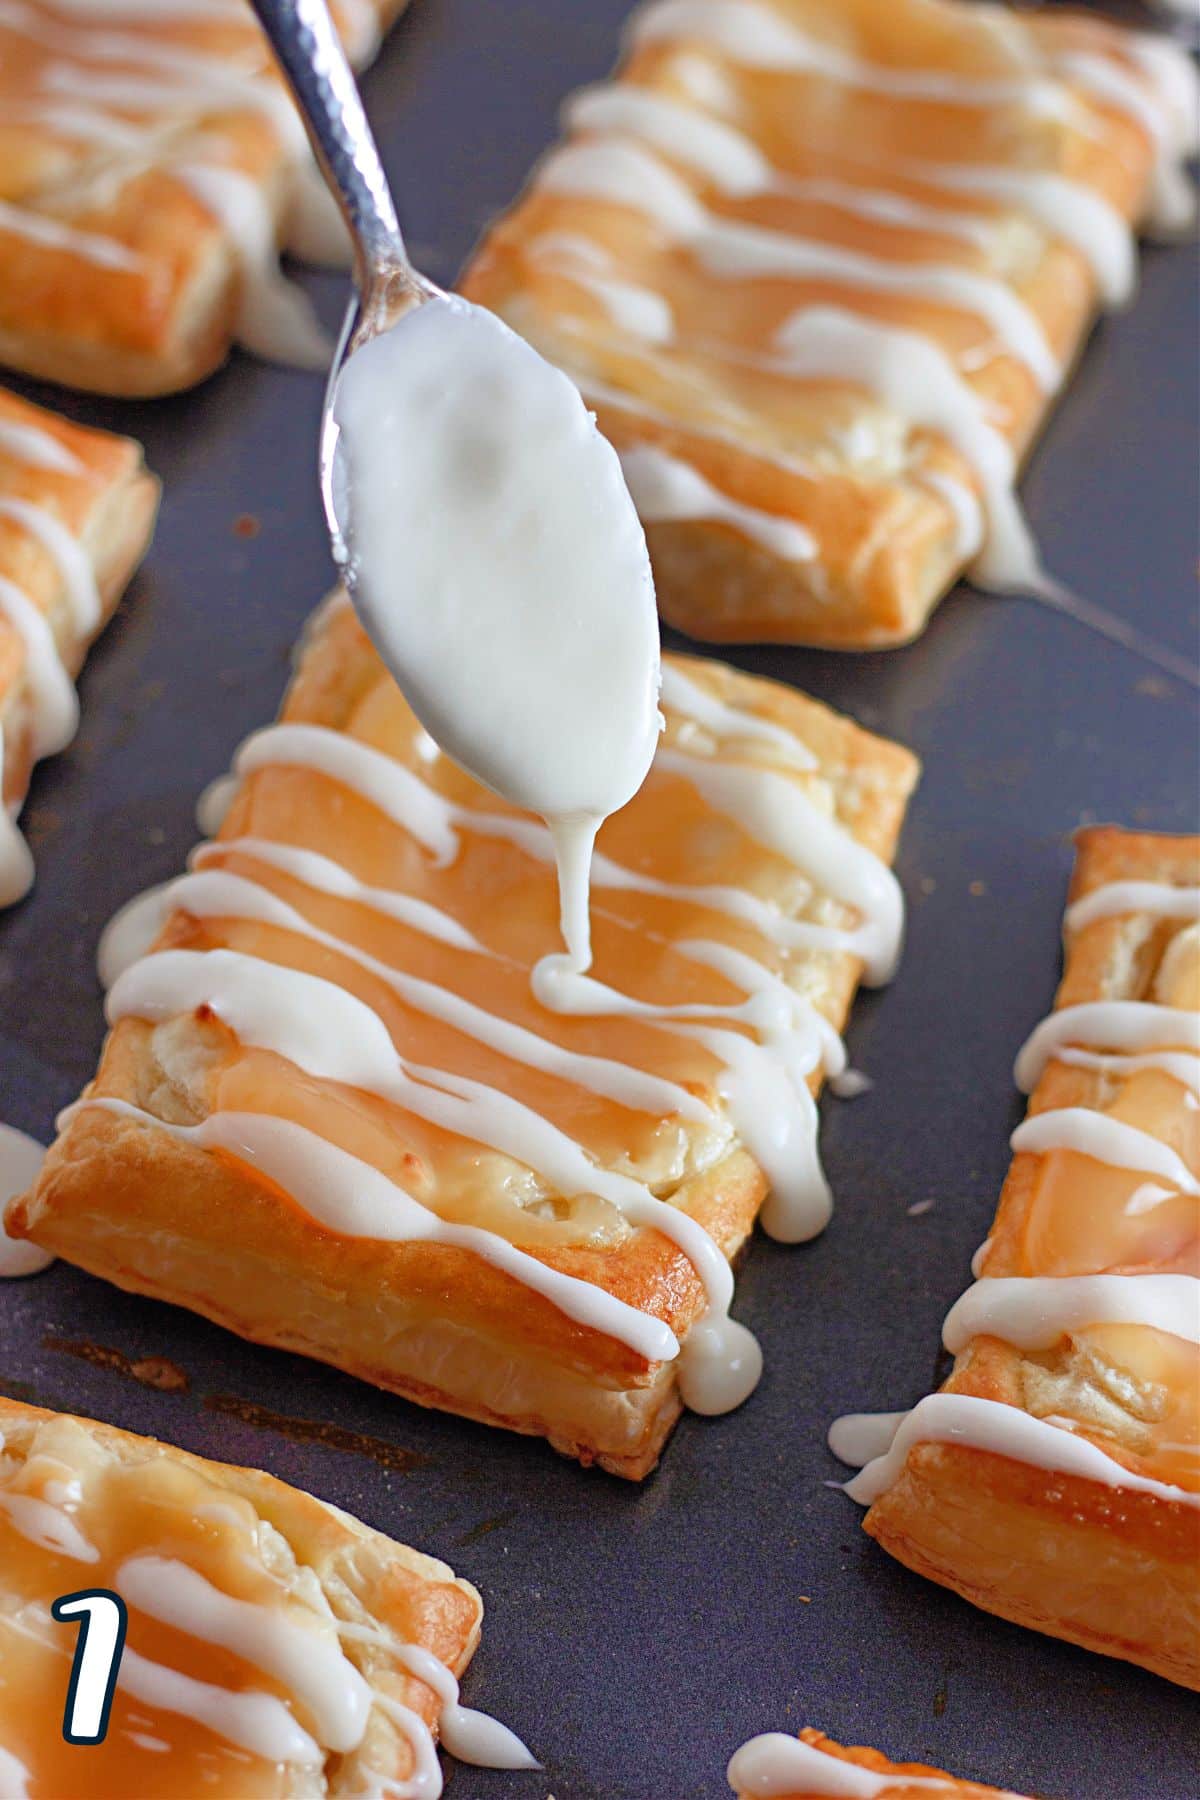 Glaze being drizzled over lemon pastries. 